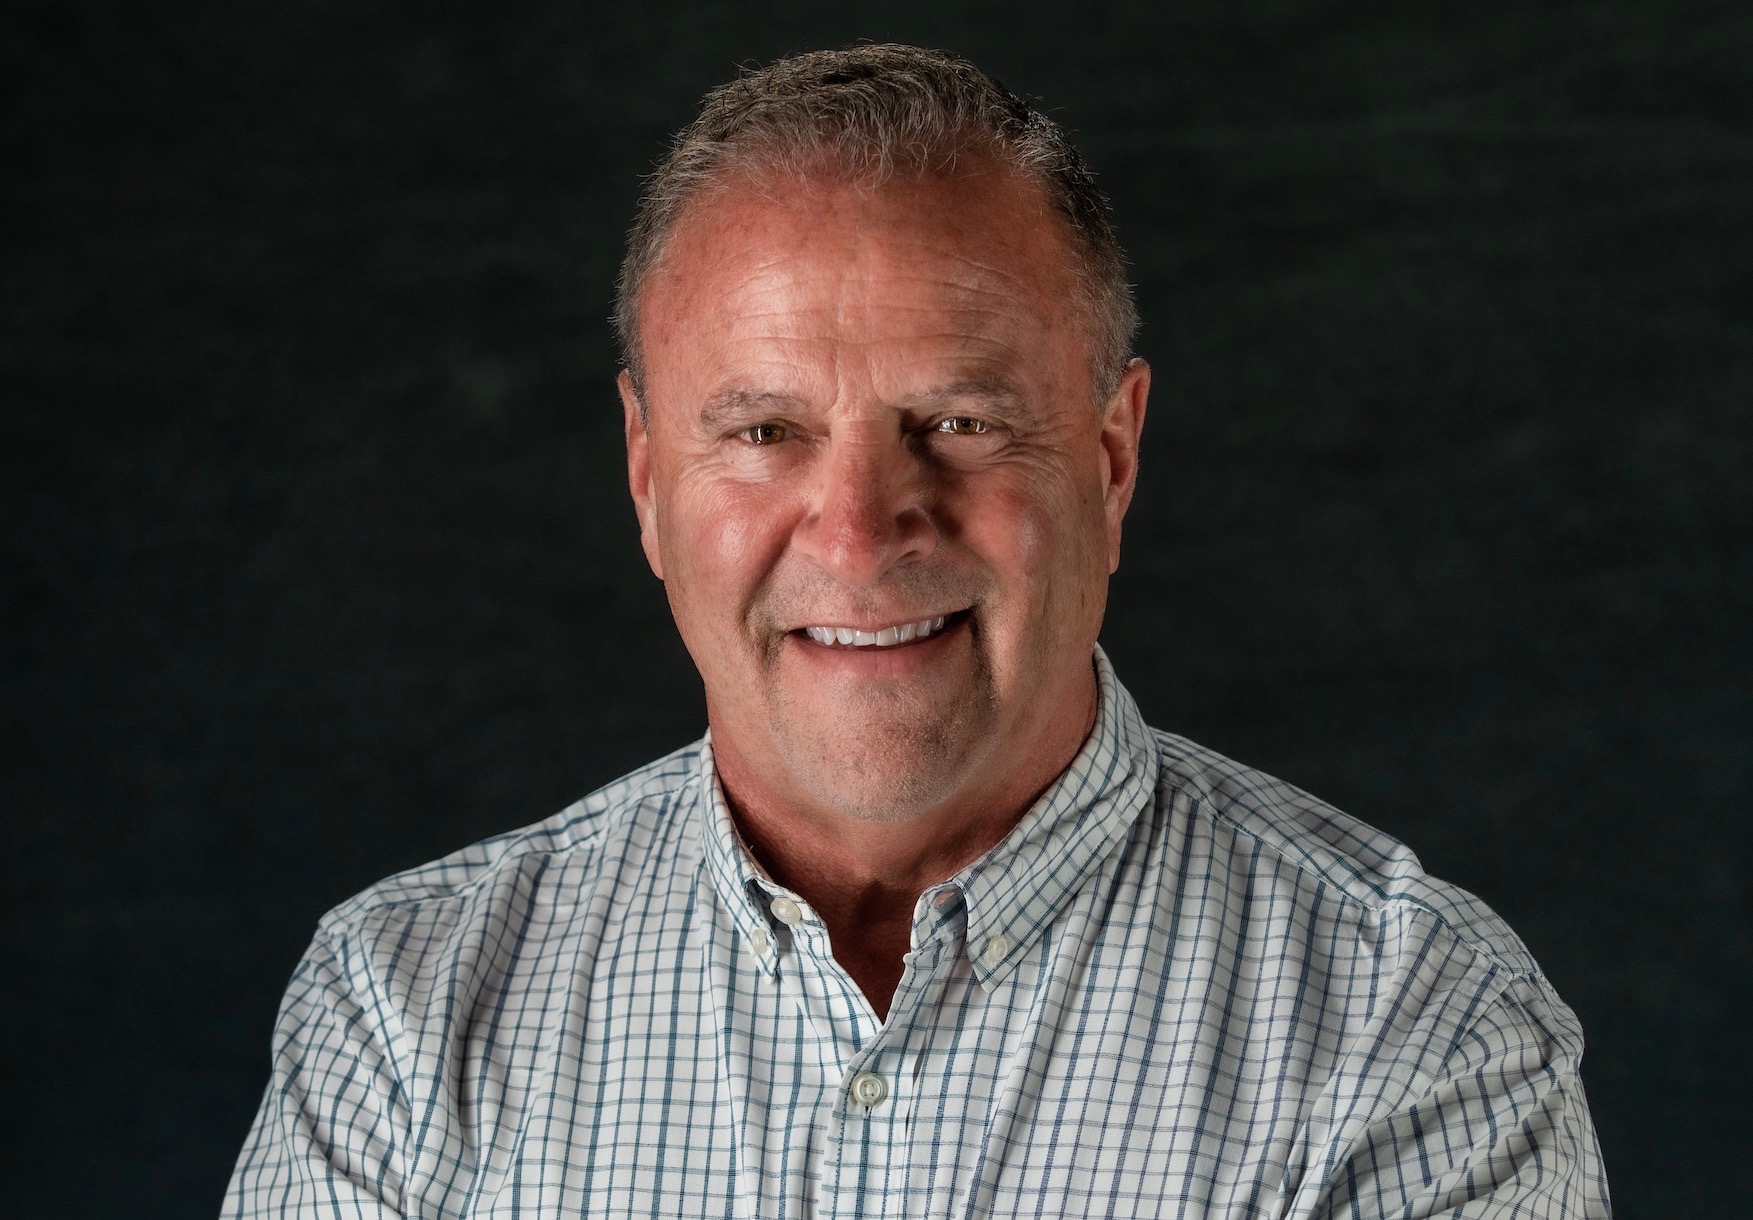 Gary Nemmers named the new CEO at Magaya Corporation.